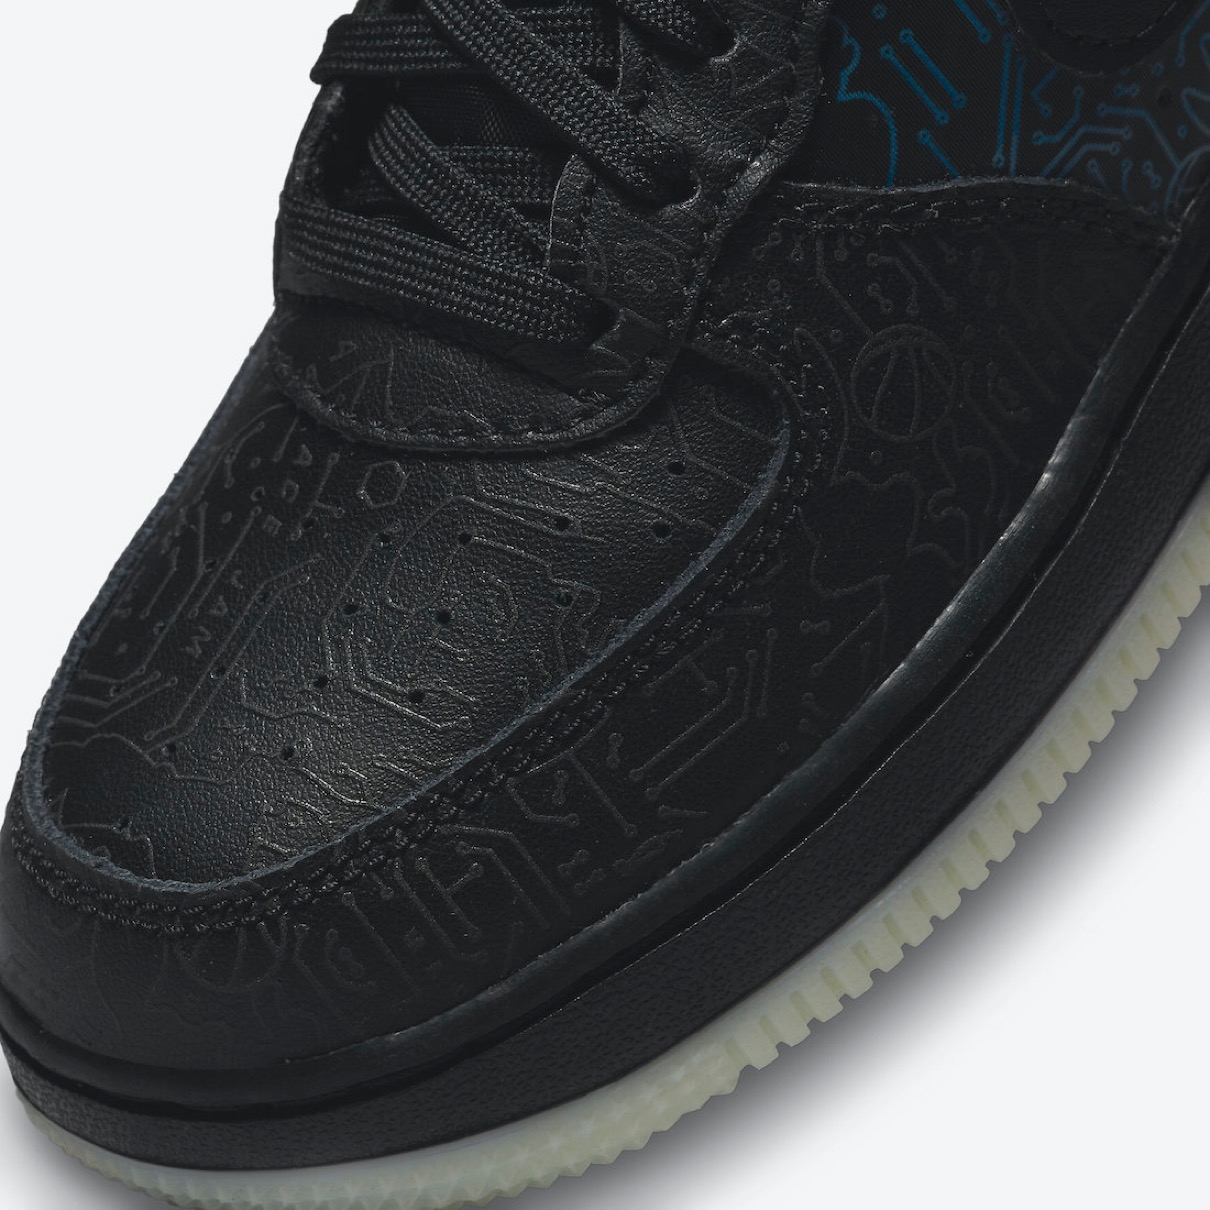 Space Jam × Nike】Air Force 1 '07 “Computer Chip”が国内7月16日に発売予定 | UP TO DATE